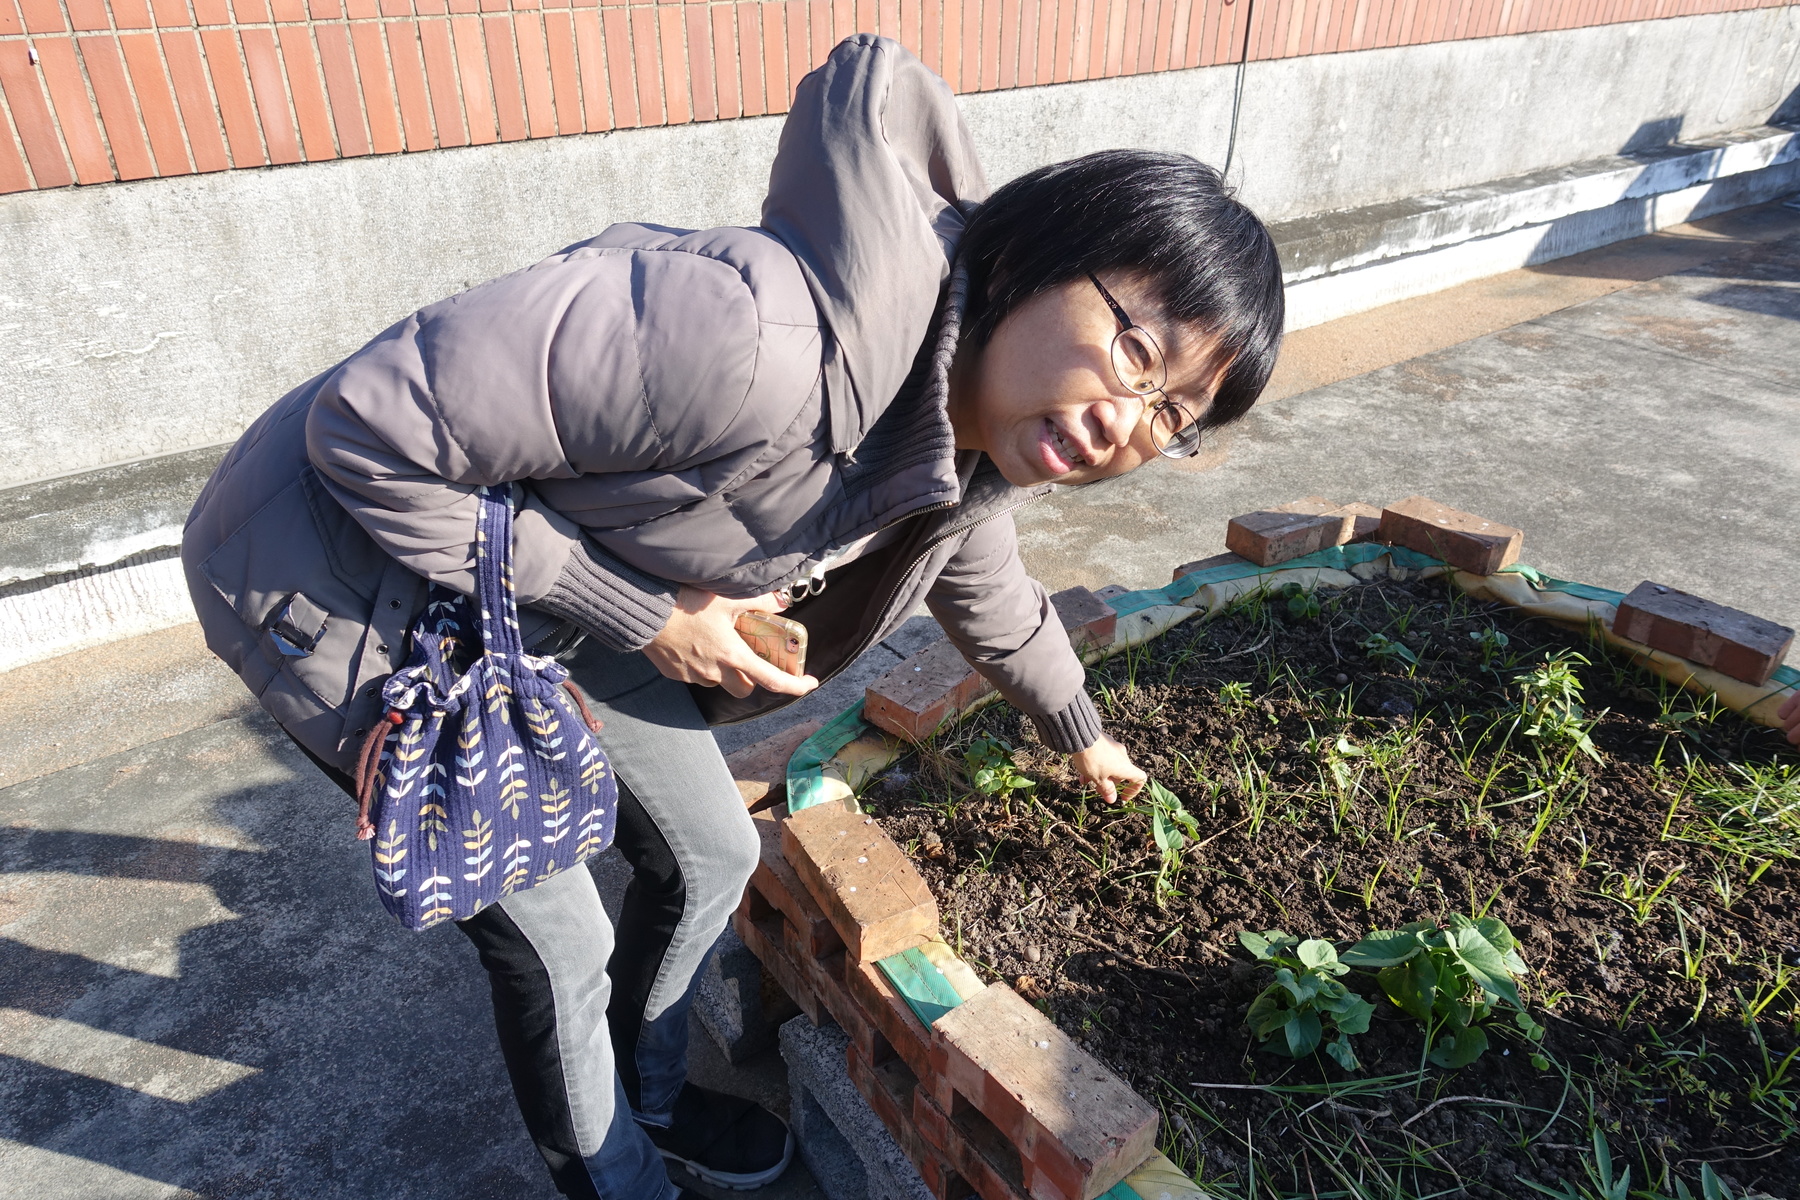 The students established the garden under the supervision of Associate Professor of the Department of Sociology Hua-Mei Chiu.